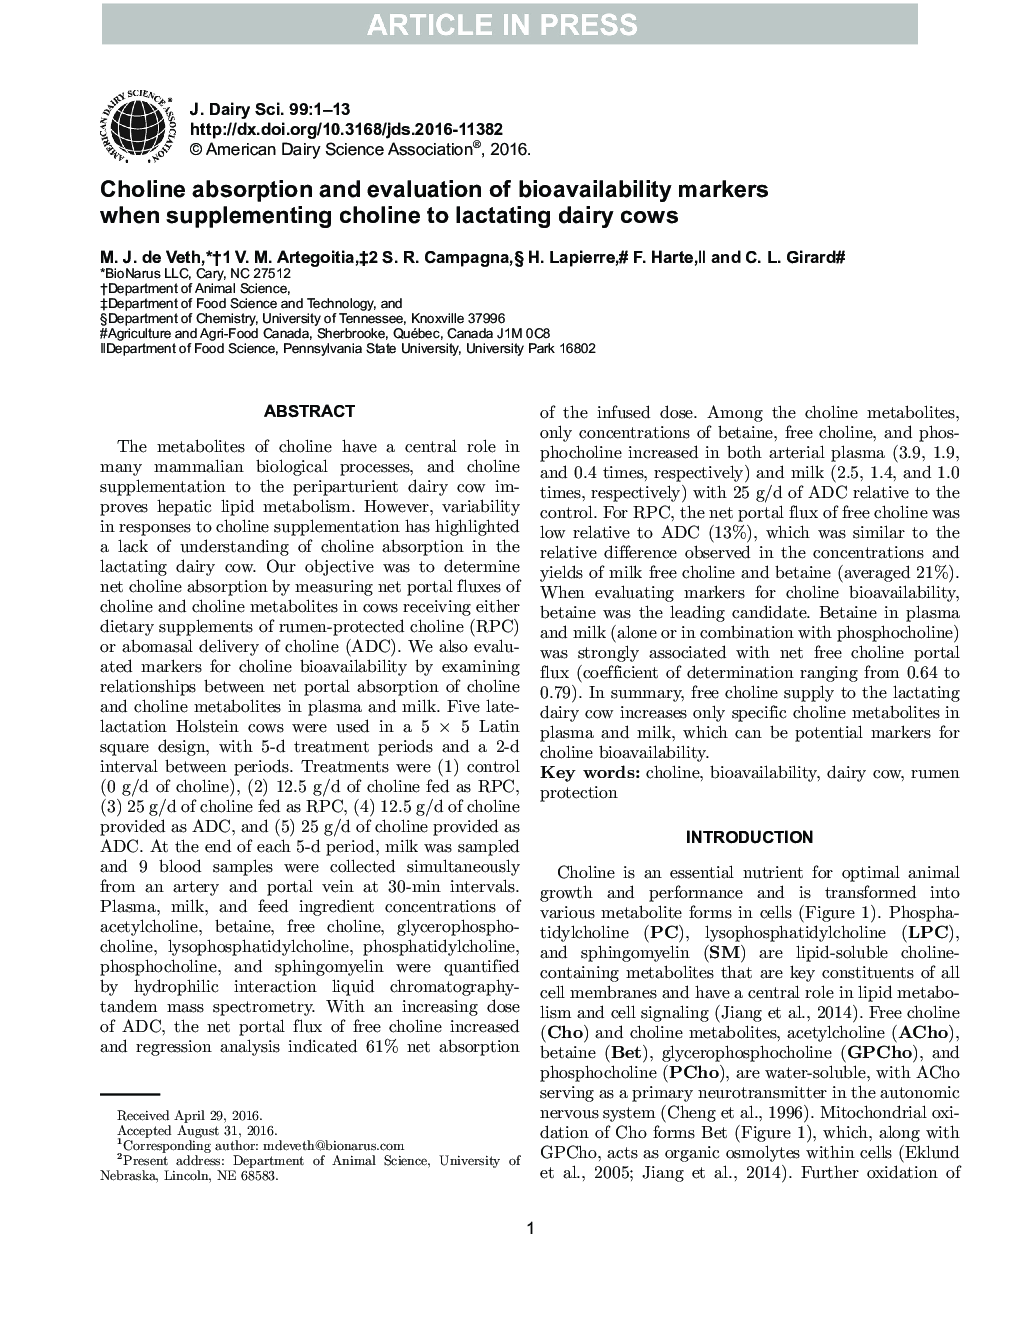 Choline absorption and evaluation of bioavailability markers when supplementing choline to lactating dairy cows